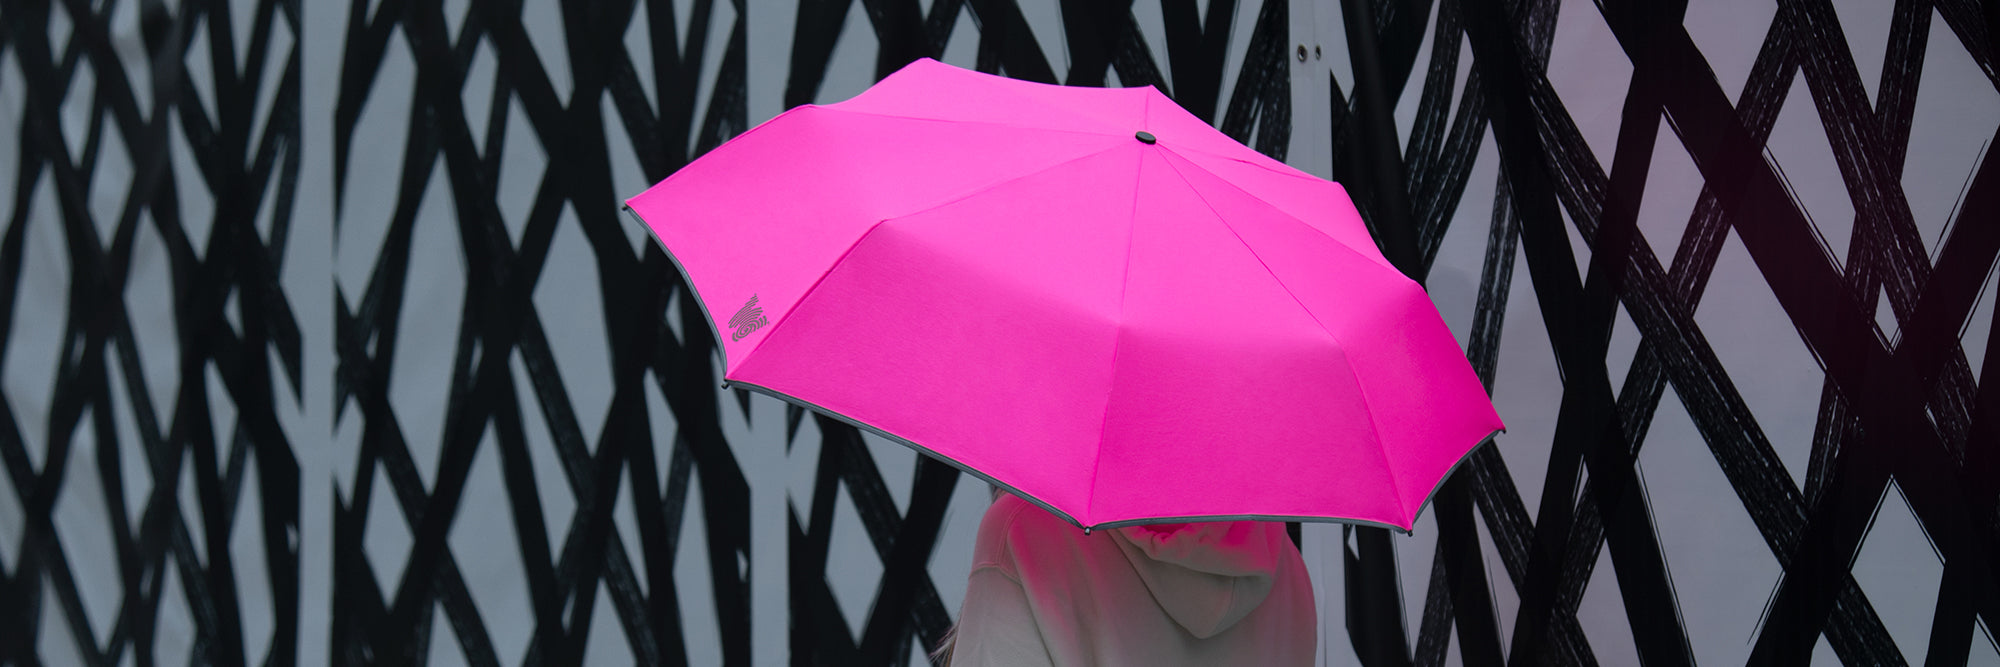 Weatherman's Travel Umbrella Listed as Best Overall on WIRED